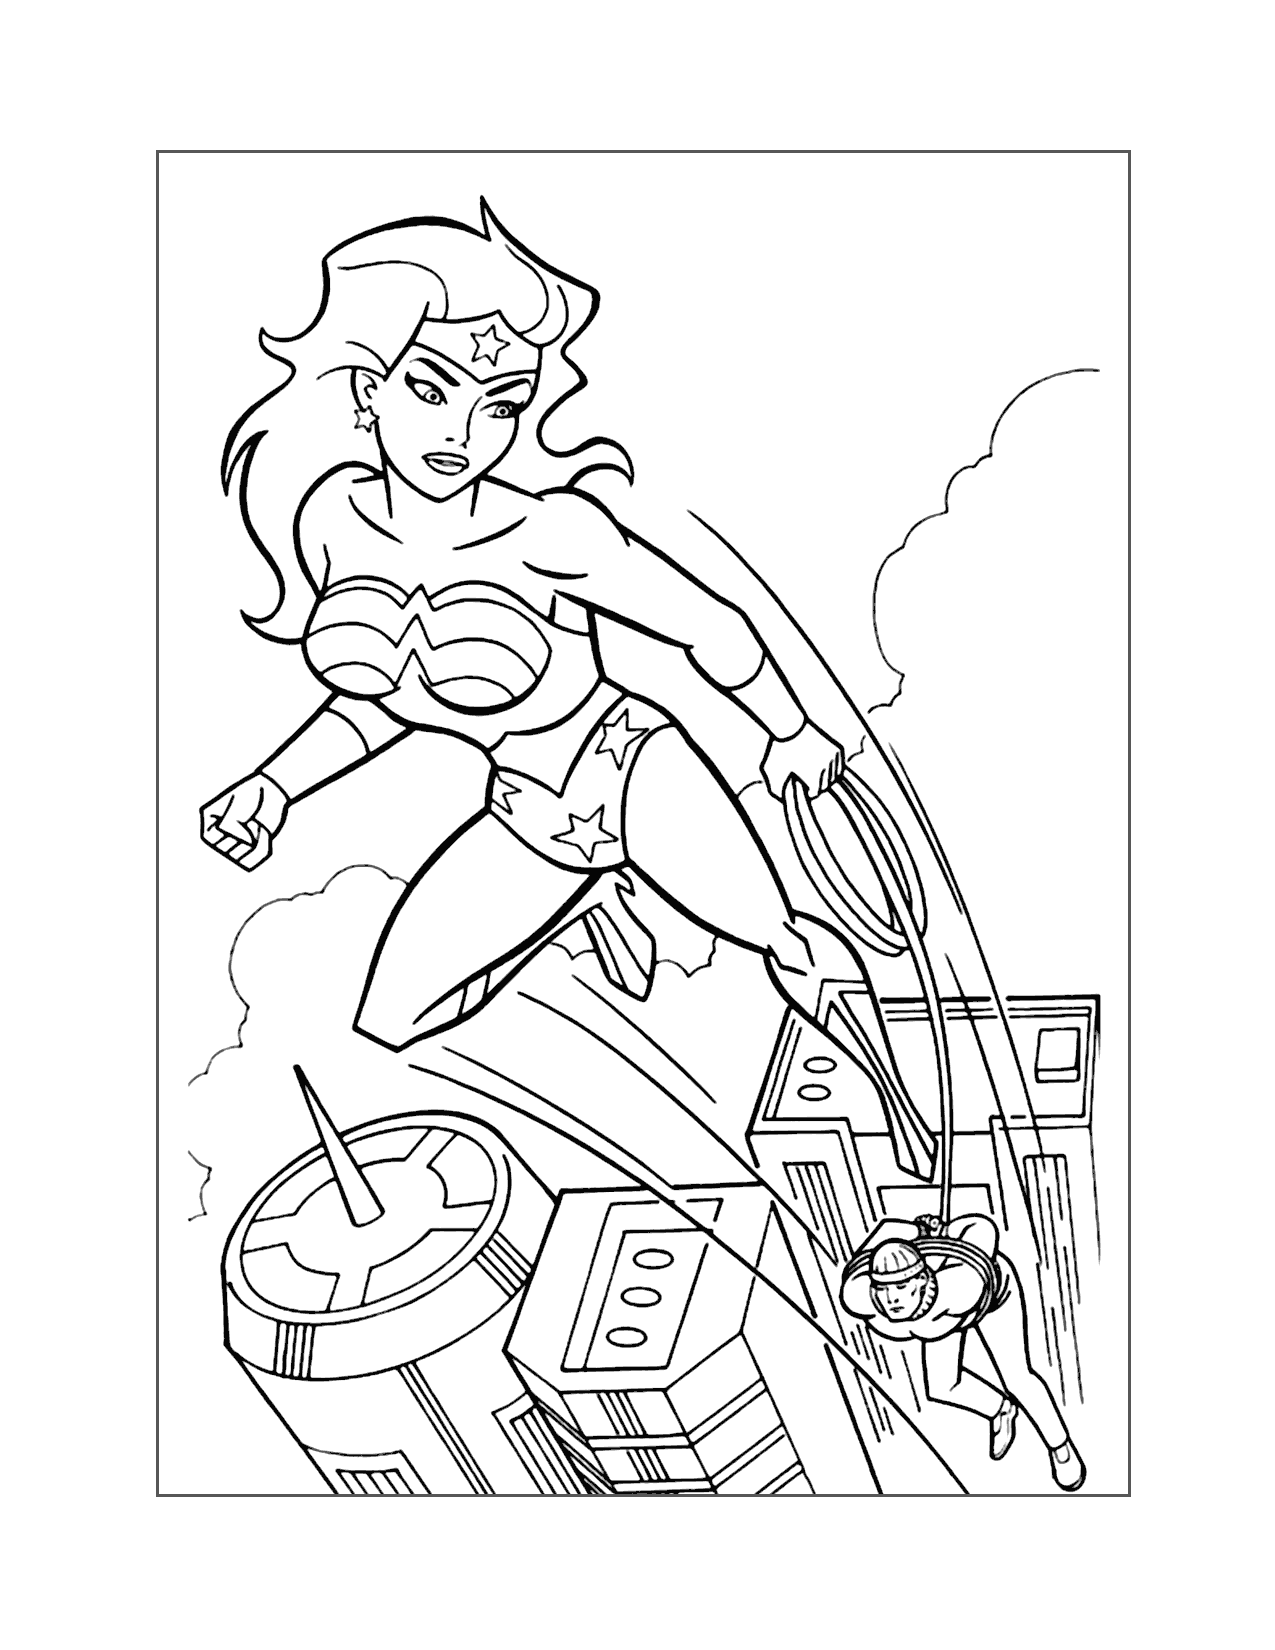 Wonder Woman Catches The Bad Guy Coloring Page